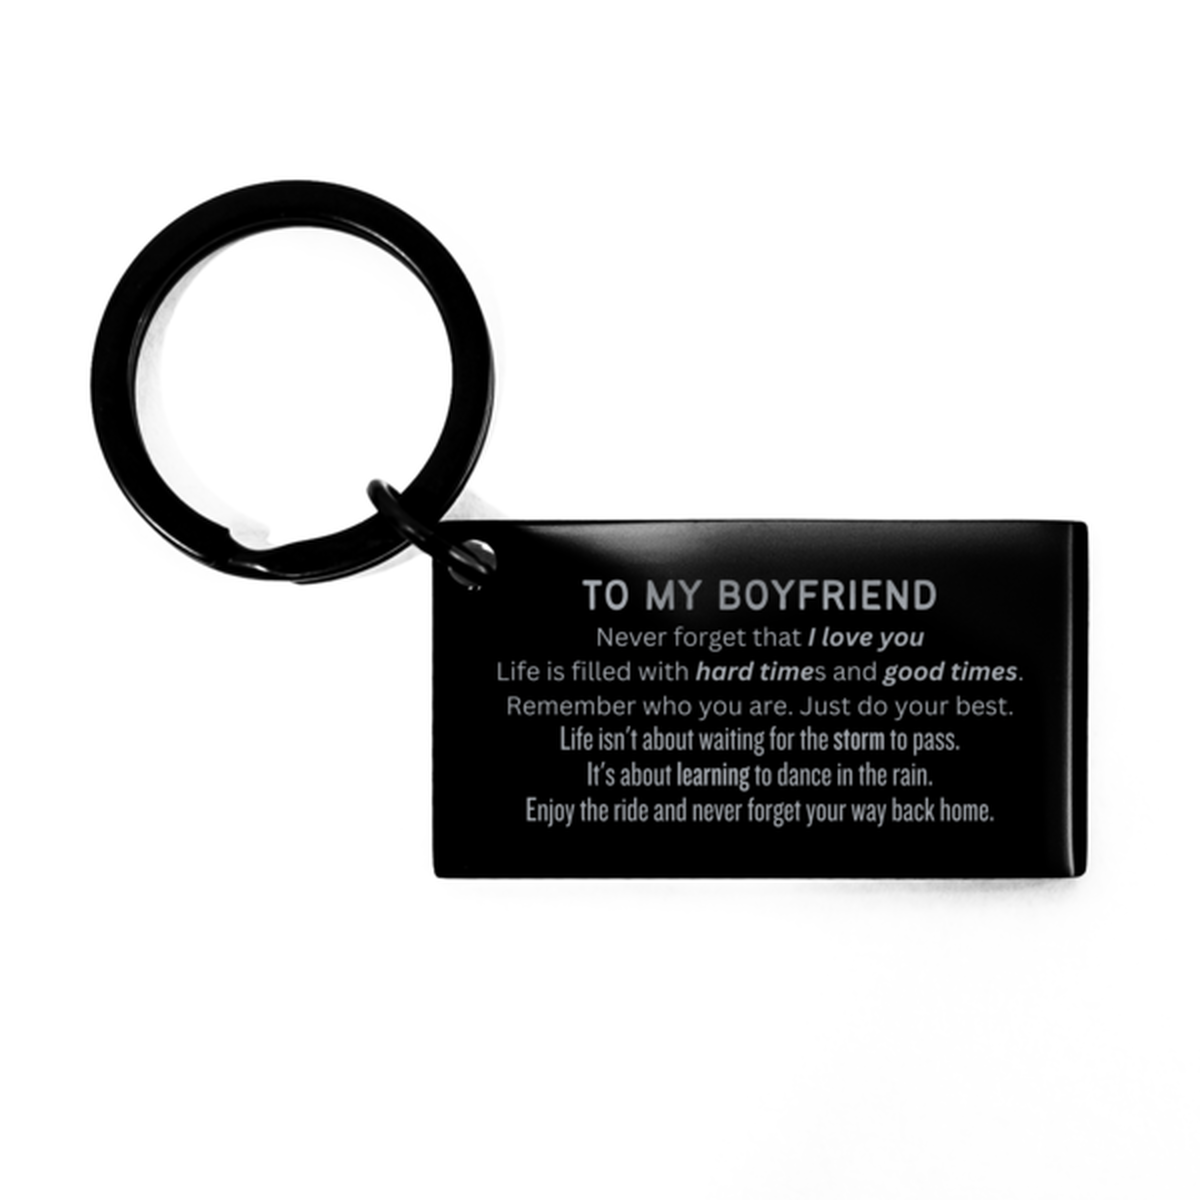 Christmas Boyfriend Keychain Gifts, To My Boyfriend Birthday Thank You Gifts For Boyfriend, Graduation Unique Gifts For Boyfriend To My Boyfriend Never forget that I love you life is filled with hard times and good times. Remember who you are. Just do you